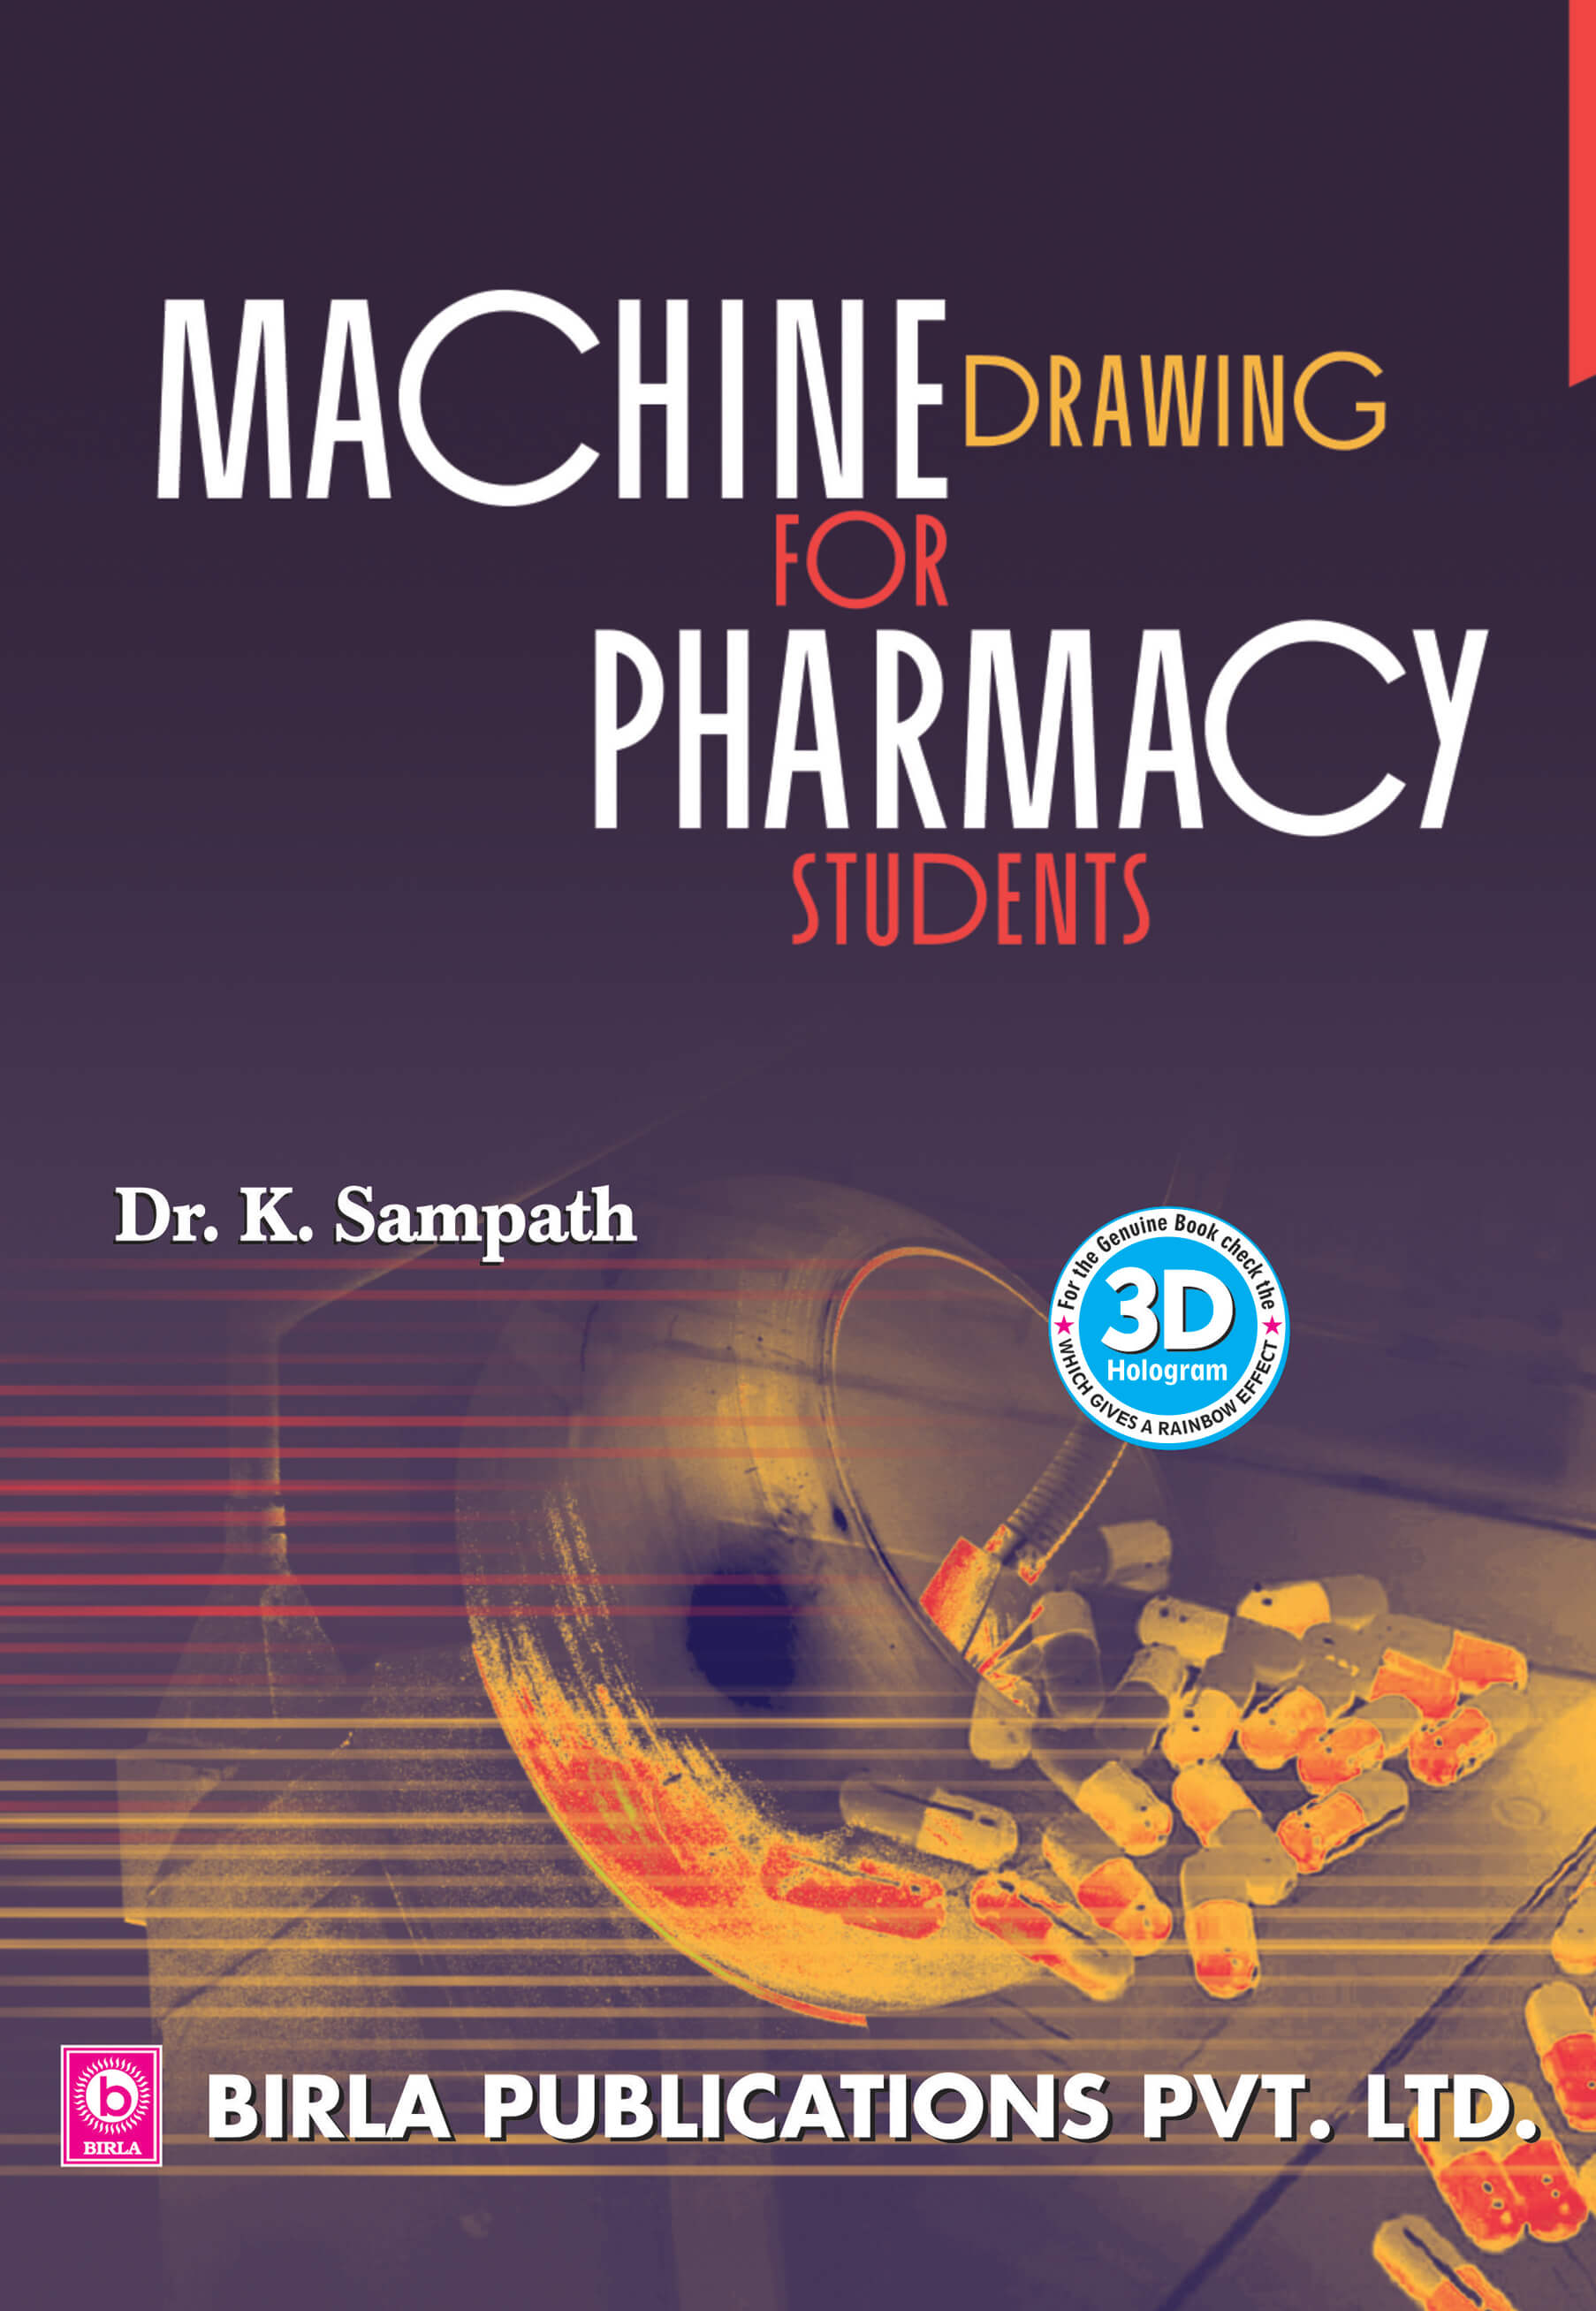 MACHINE DRAWING FOR PHARMACY STUDENTS